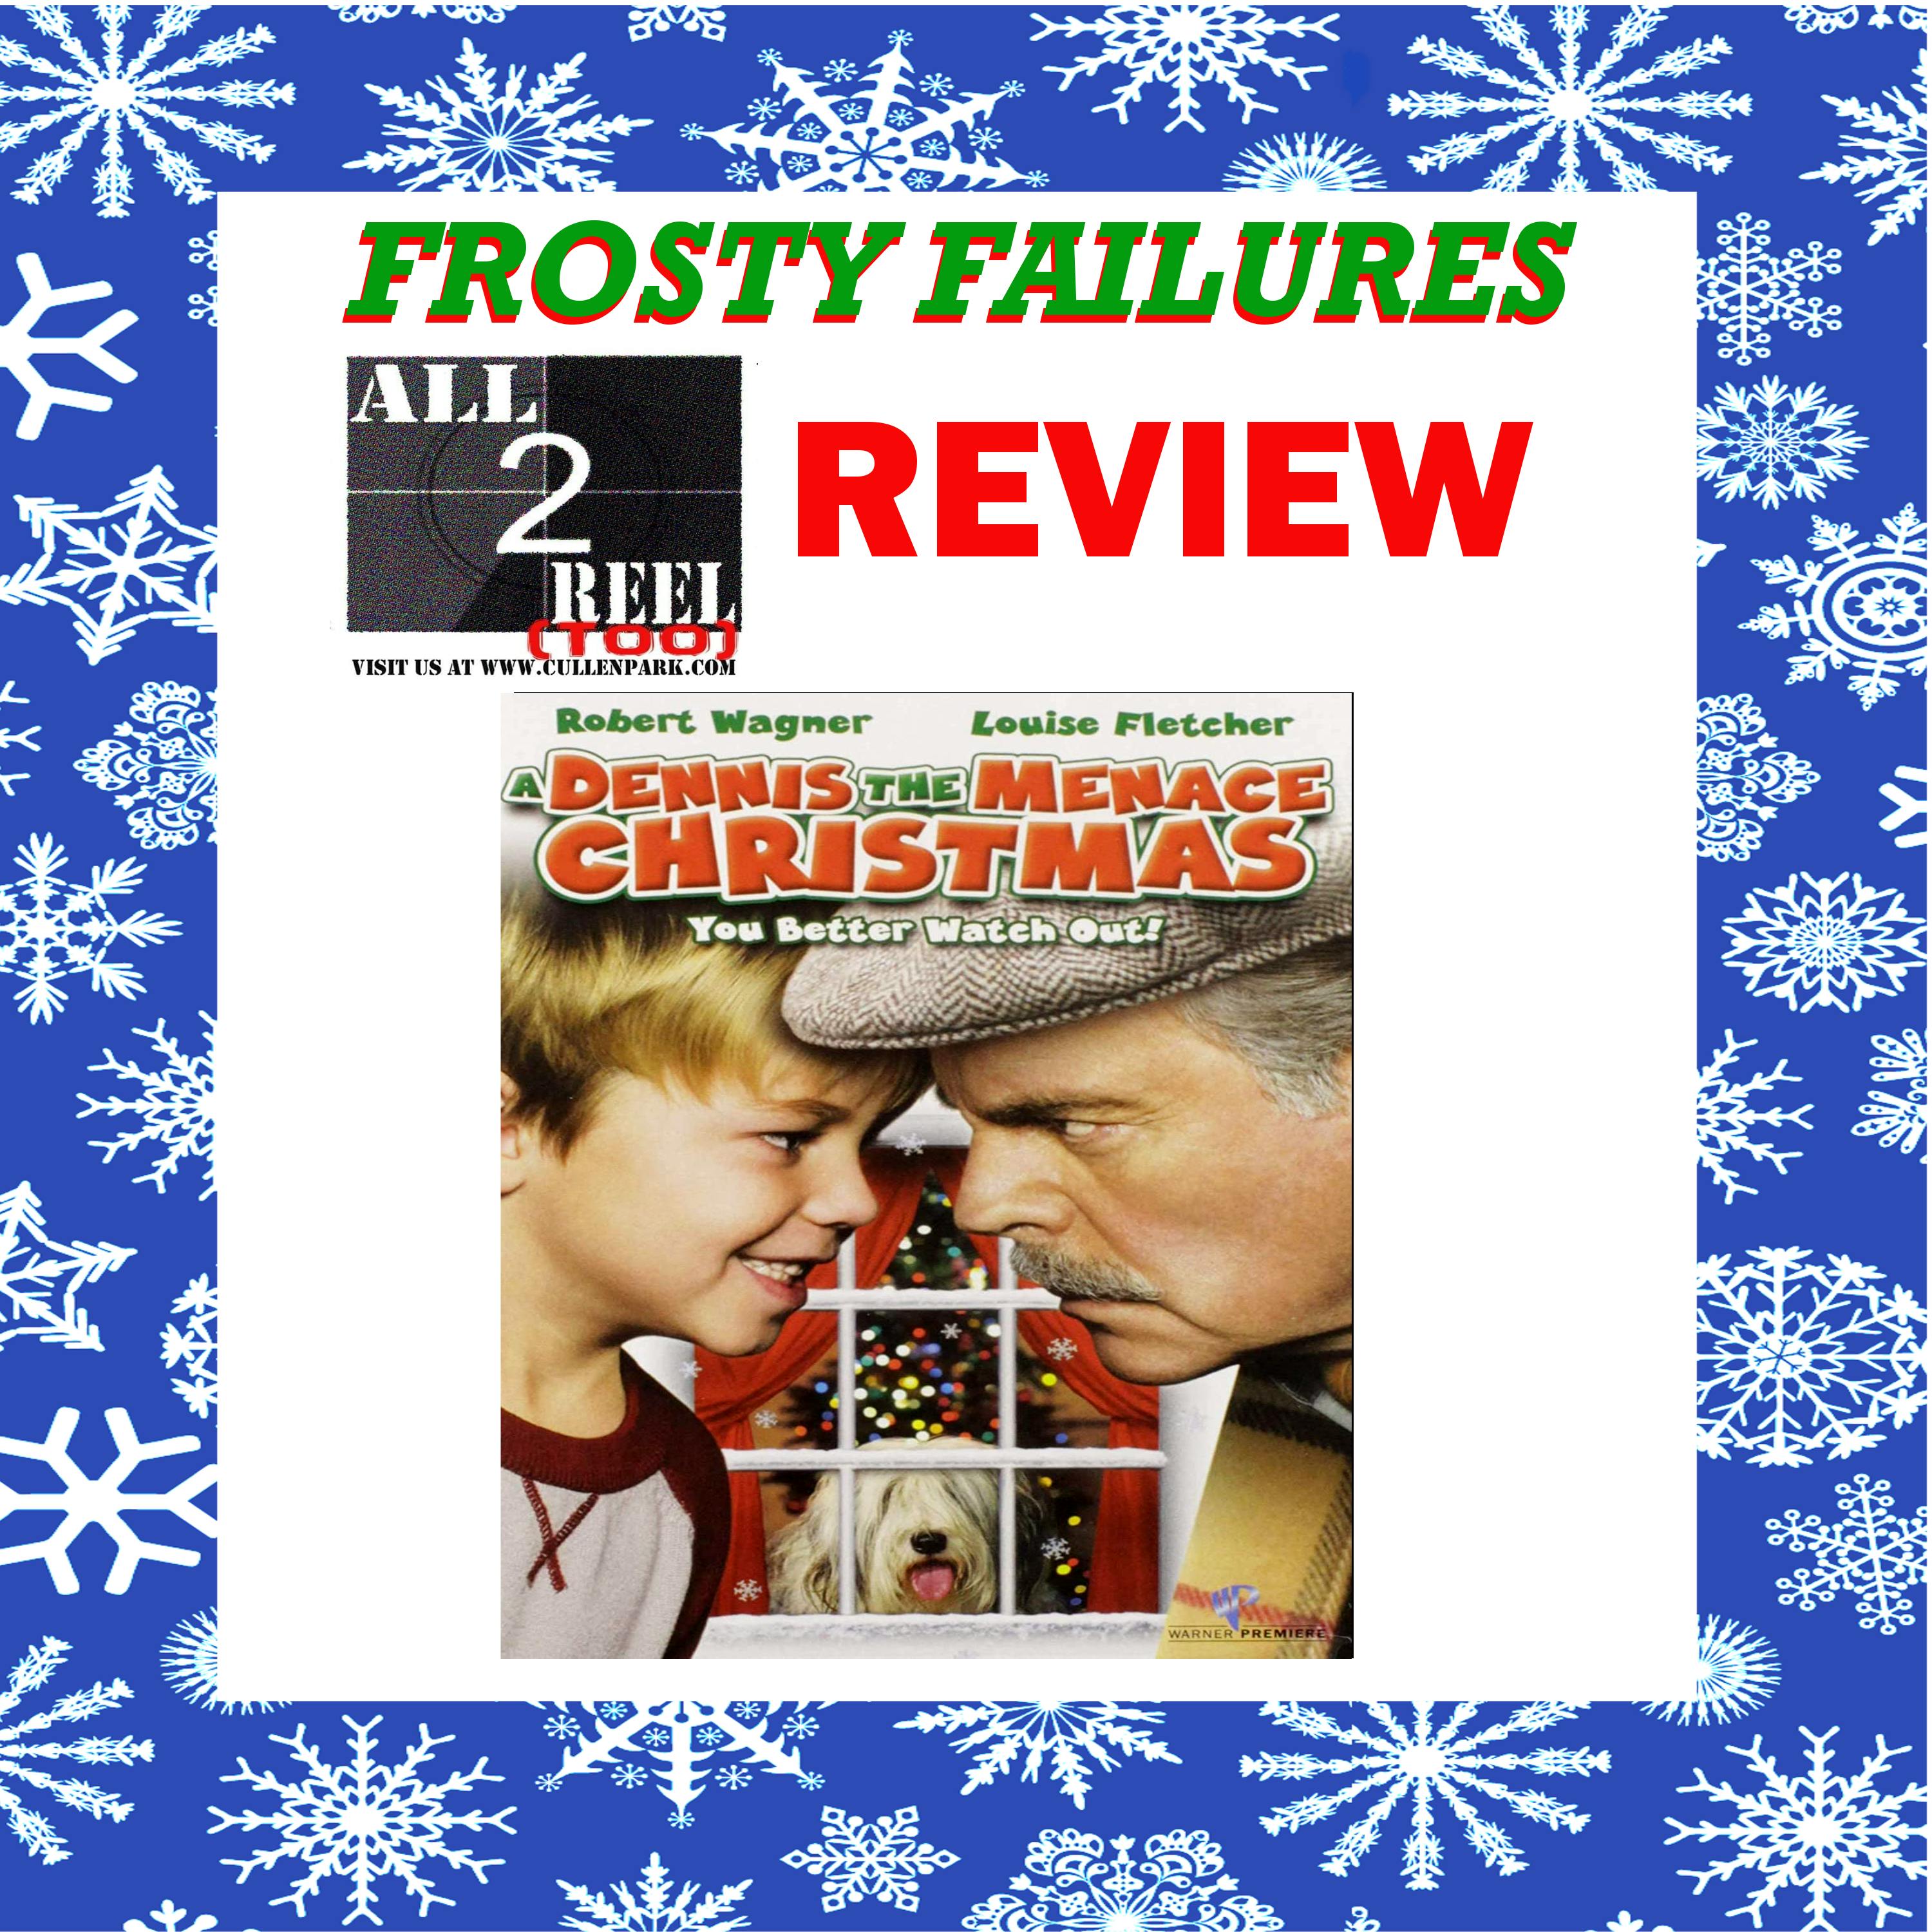 A Dennis the Menace Christmas (2007) - FROSTY FAILURES/DIRECT FROM HELL REVIEW